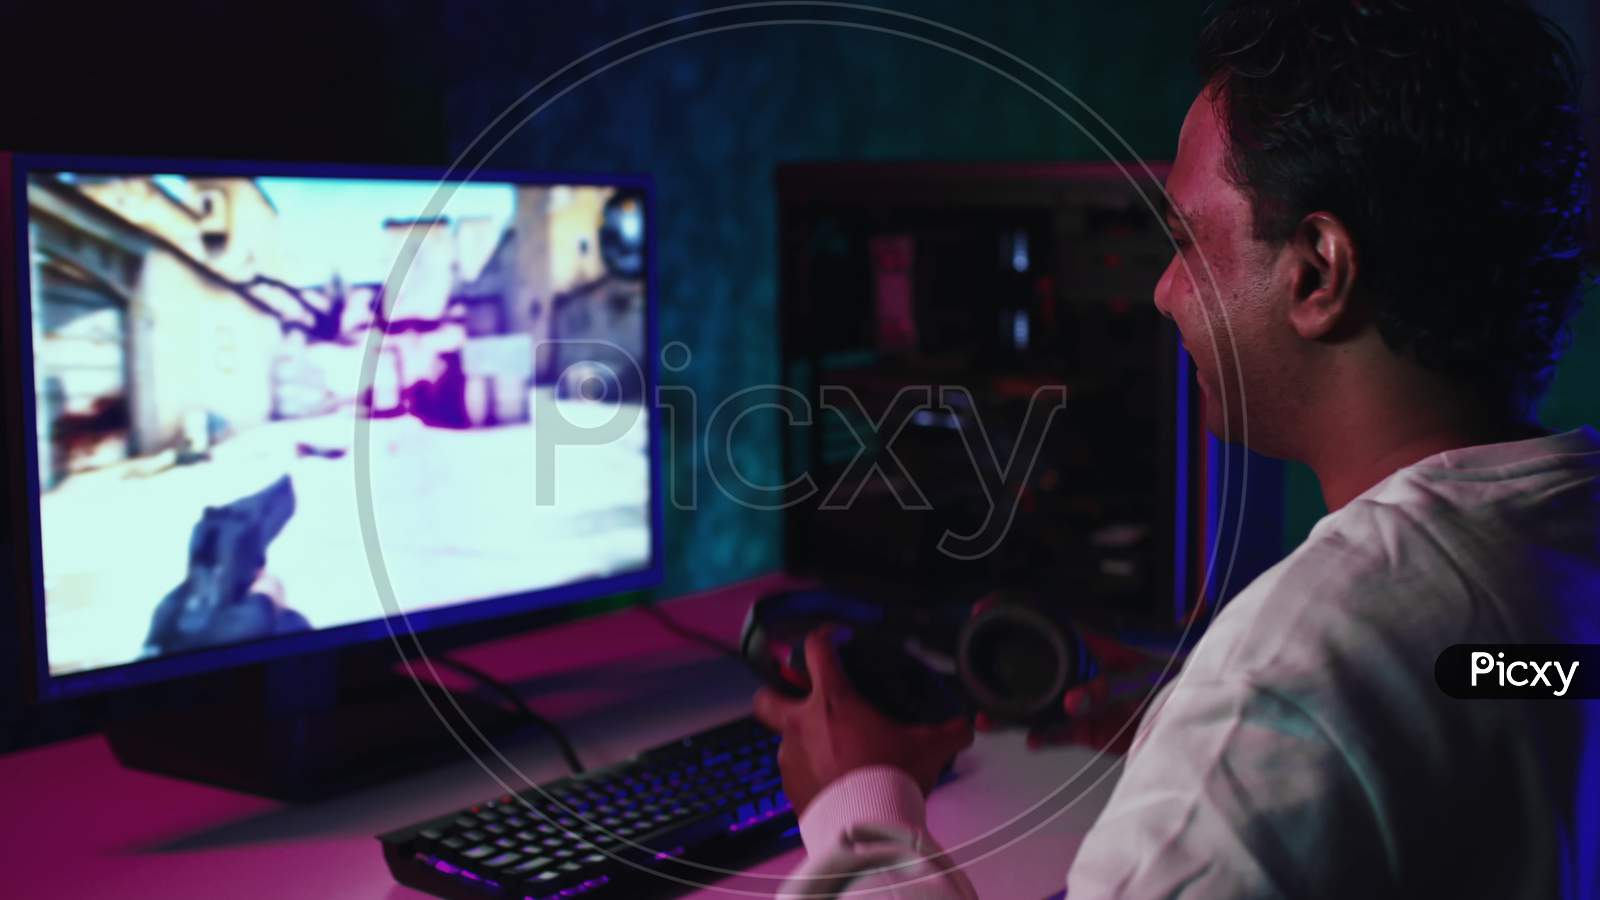 Indian Man Starts To Play Pc Game. Man Puts On Headphones And Plays Shooting Game. Gamer At Home Playing Games. Indian Man Playing Games. Shot On Red